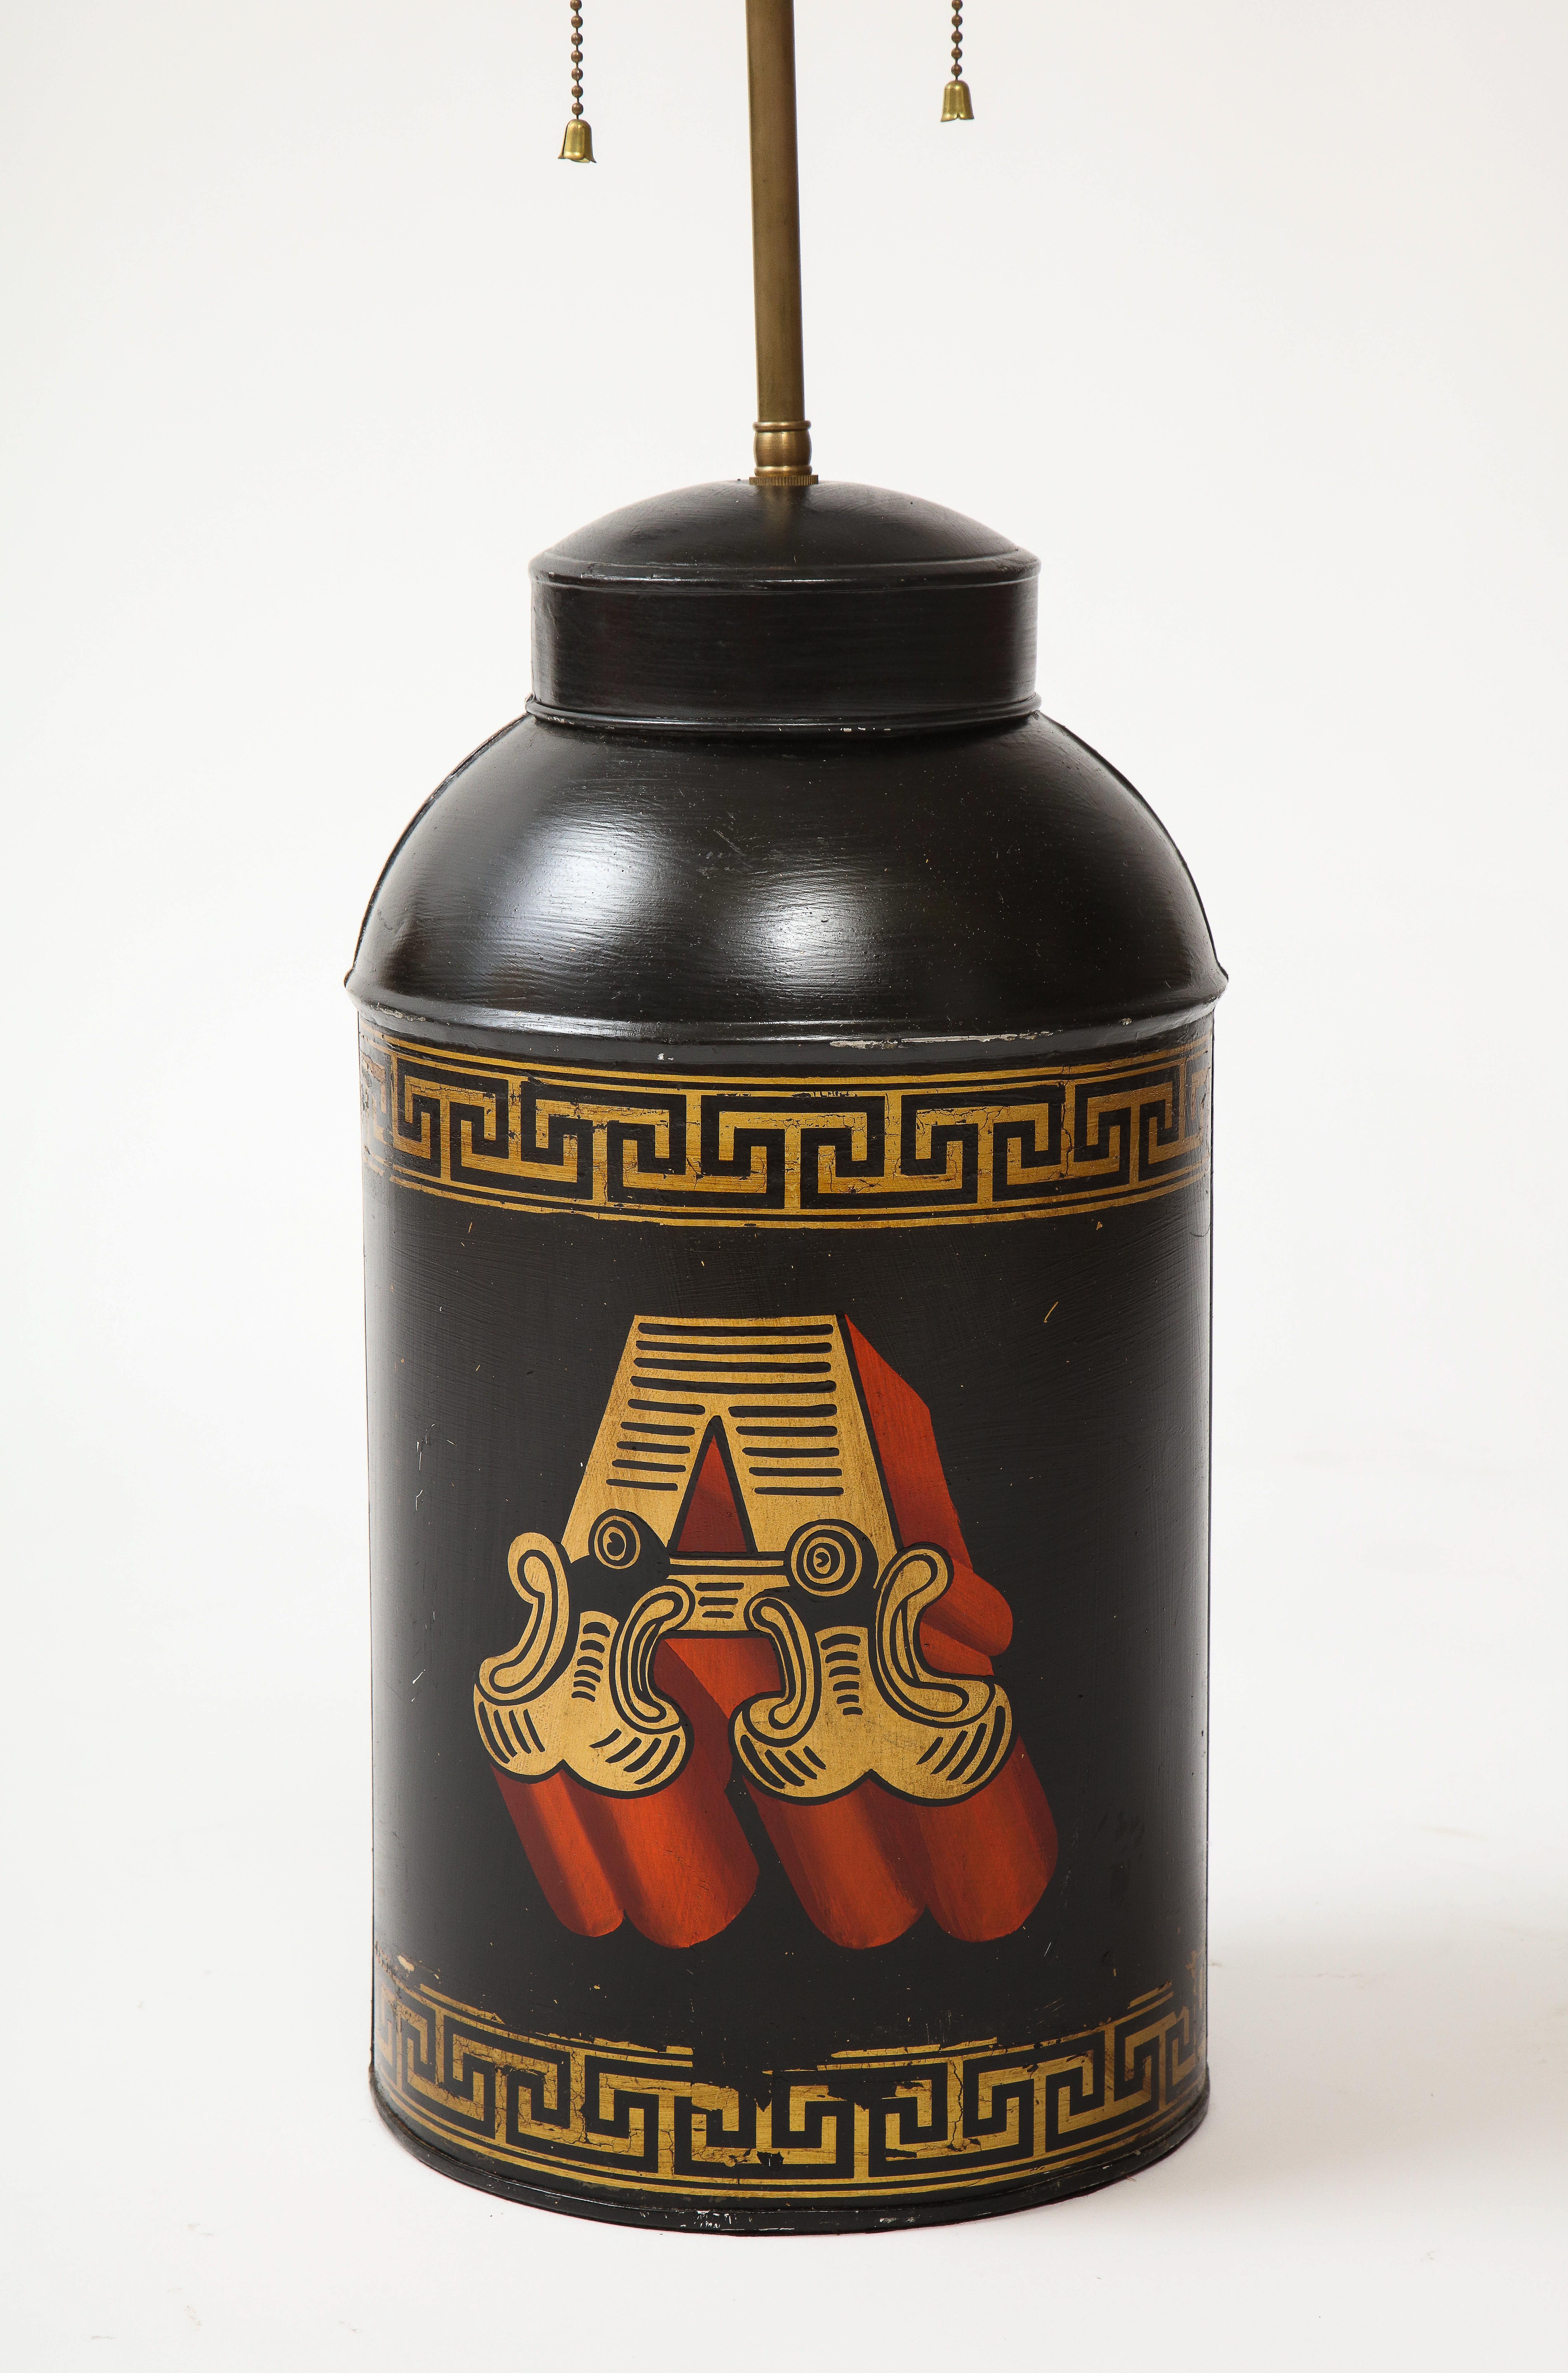 Of cylindrical form; decorated with a large gilt and red letter 